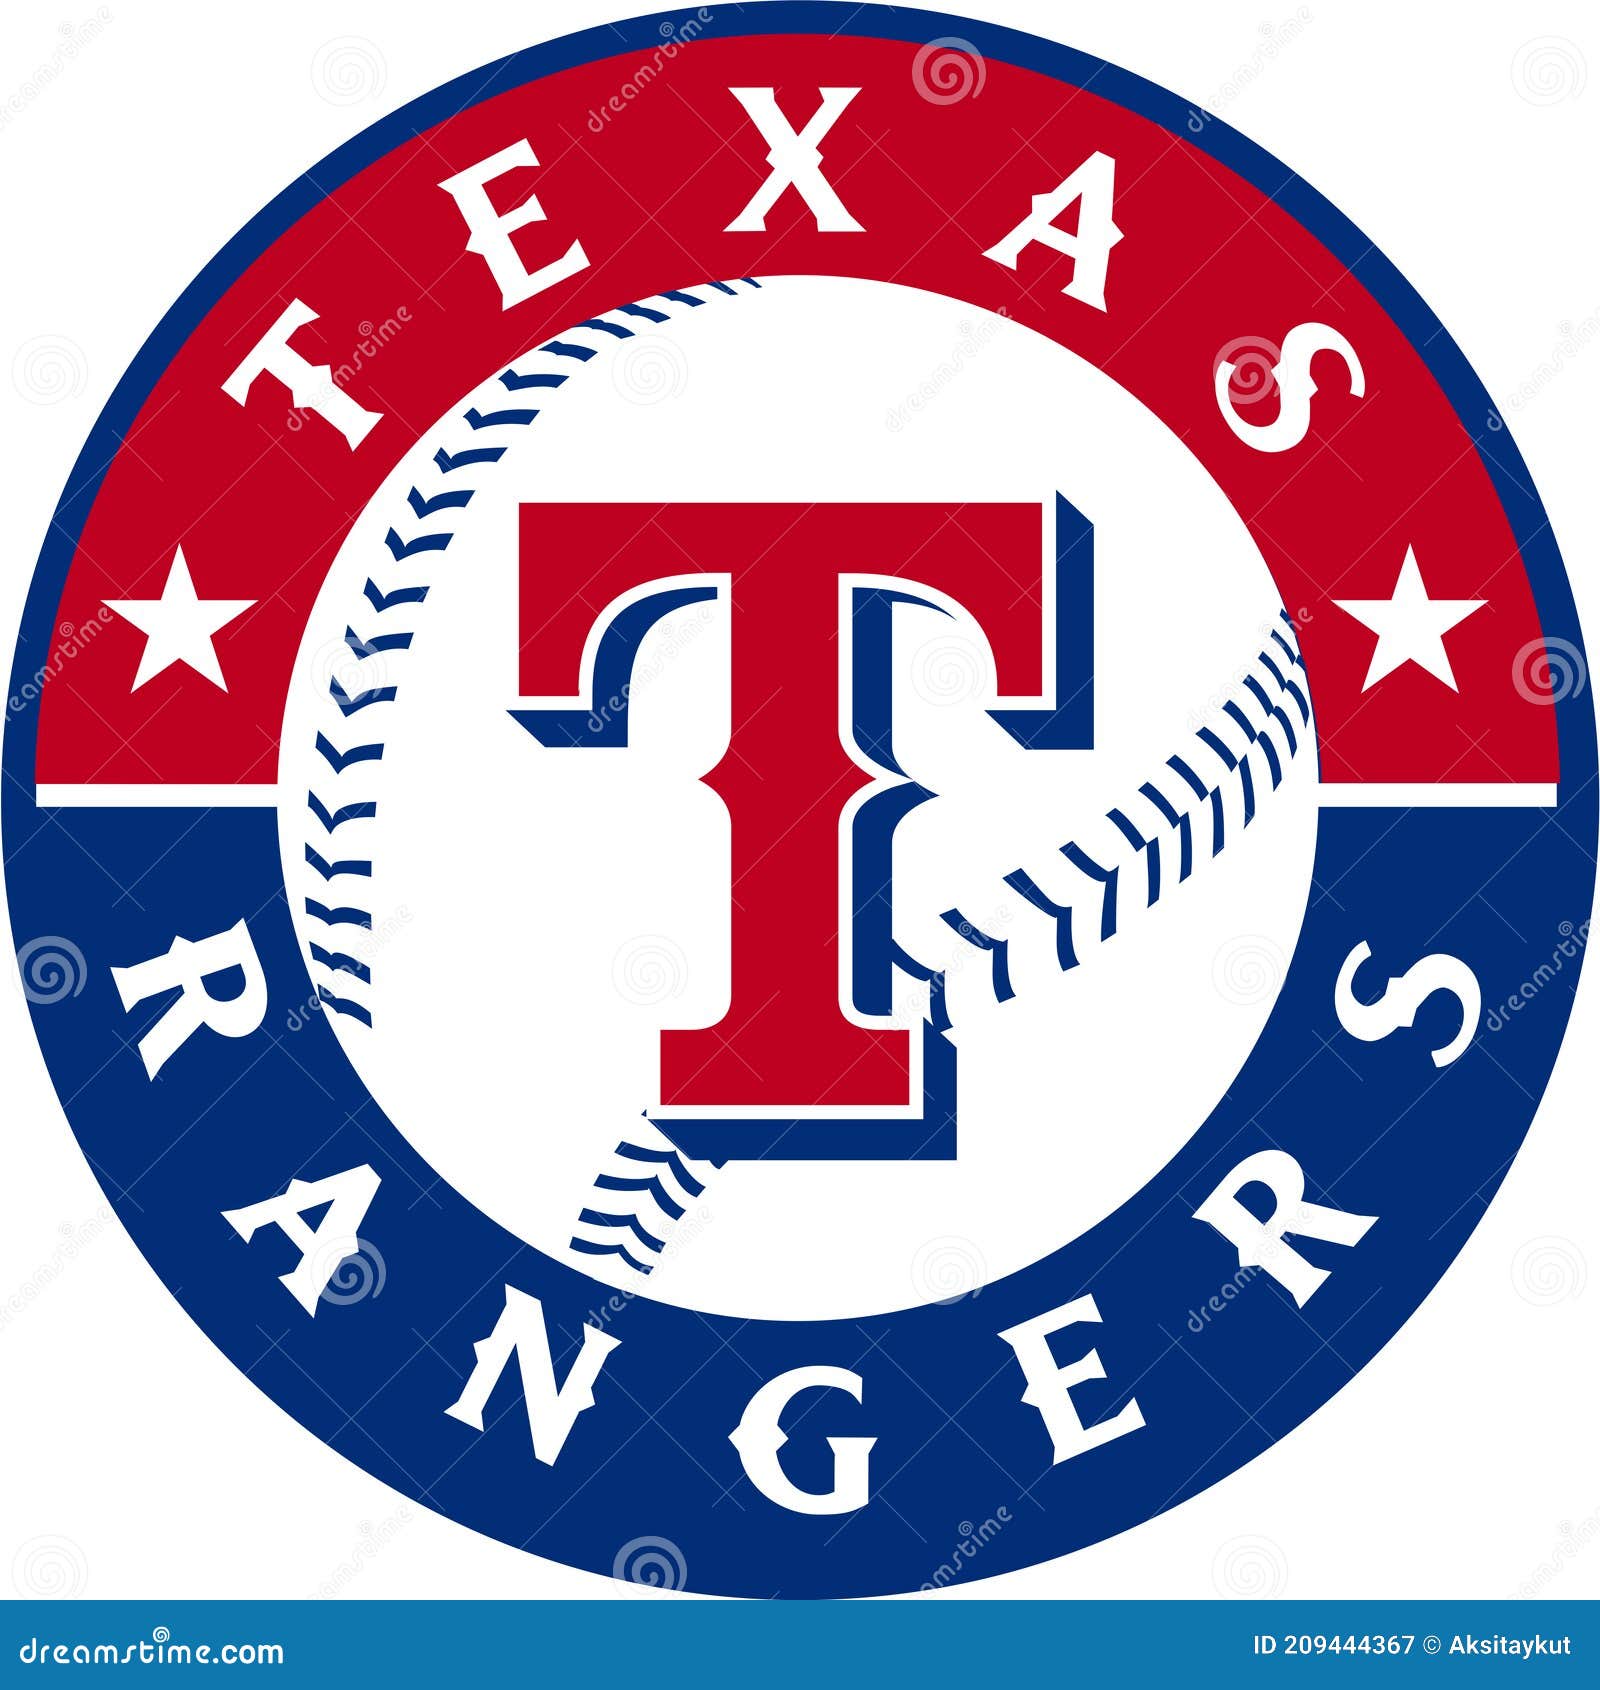 All the Texas Rangers Badges and Their Unique Designs - American